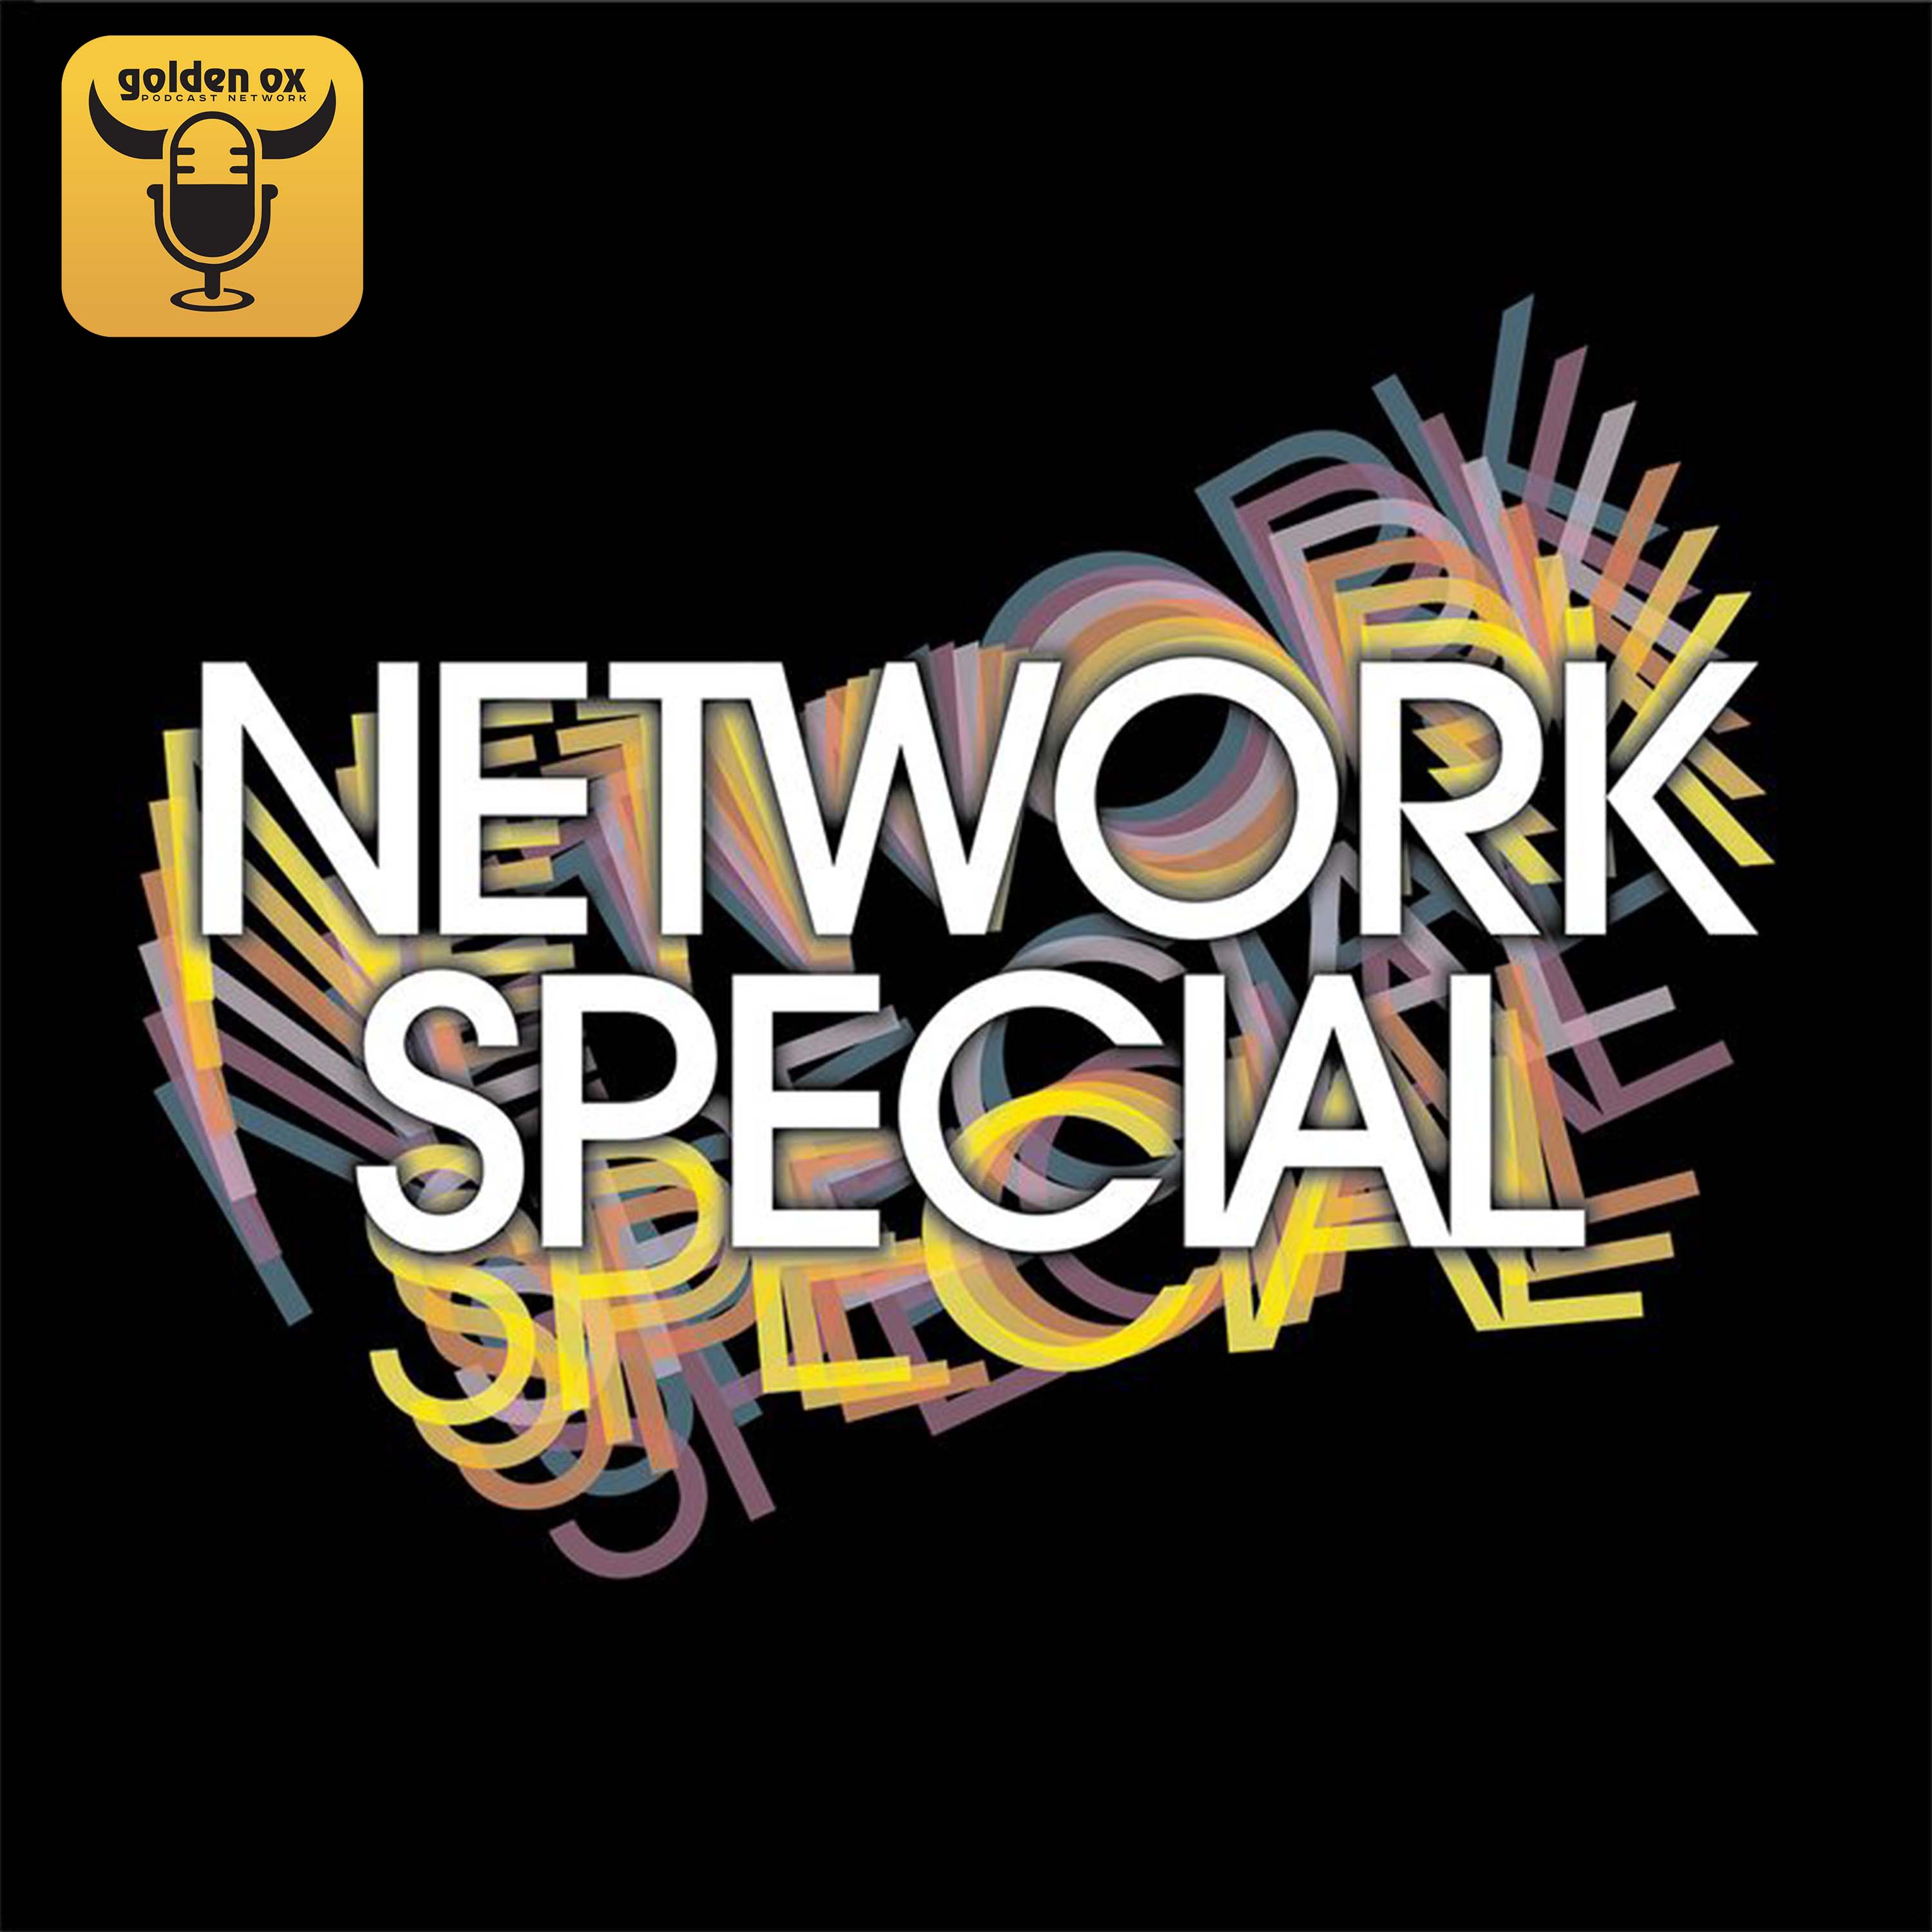 Network Special's artwork